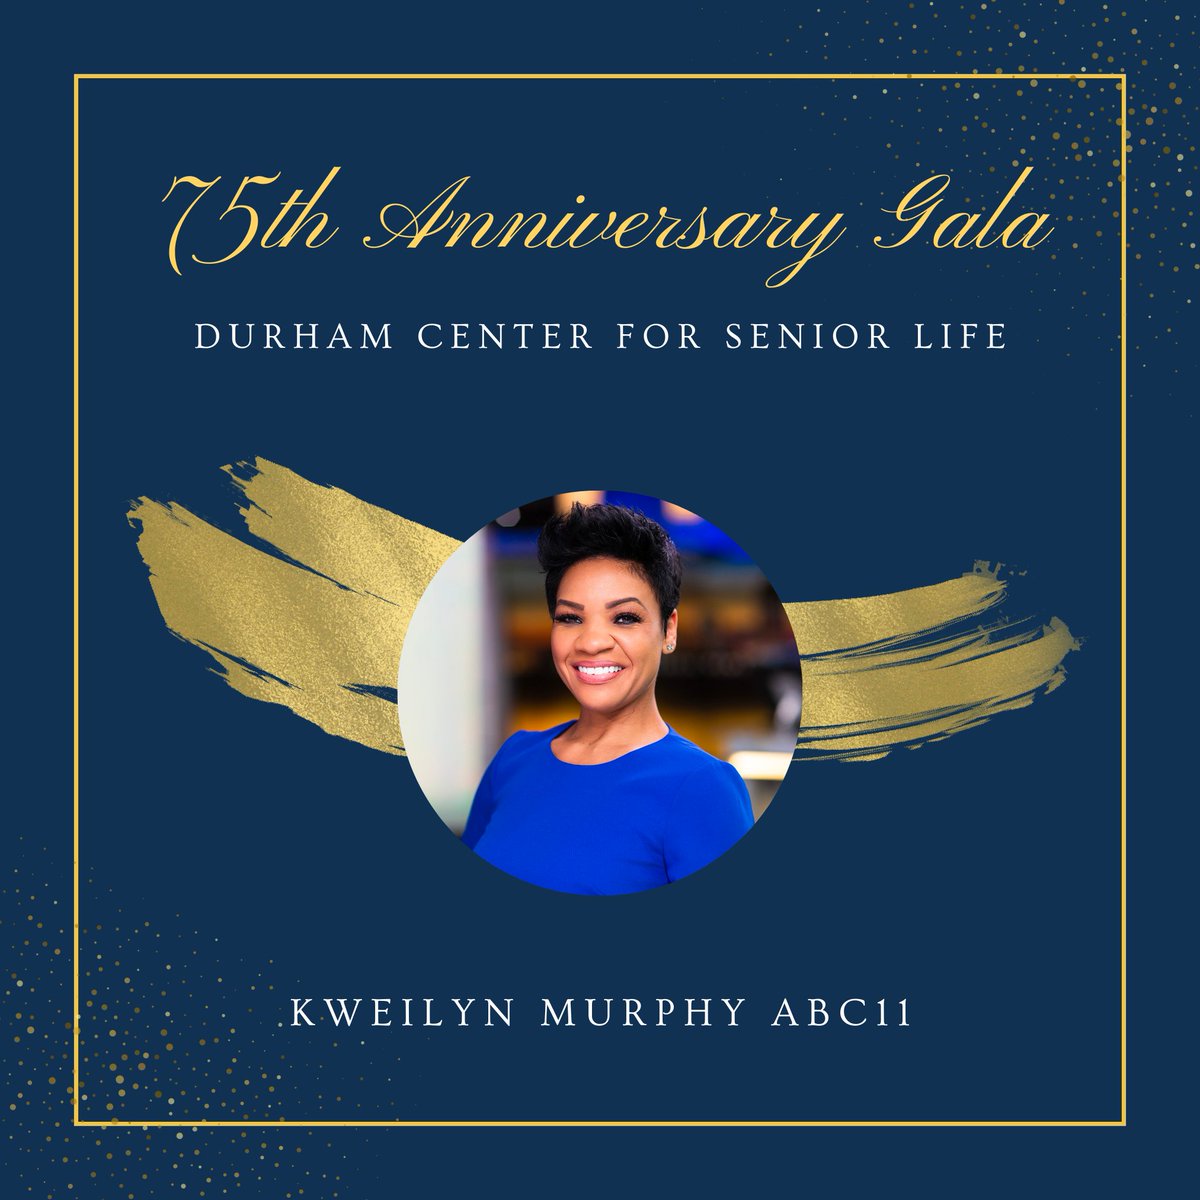 We are thrilled to announce that @KweilynMurphyTV will host DCSL's 75th Anniversary Gala on Saturday, April 27th!  

Join us for this transformative evening! Tickets are available at dcslnc.org/75th-anniversa…

@ABC11Together #abc11 #abc11together